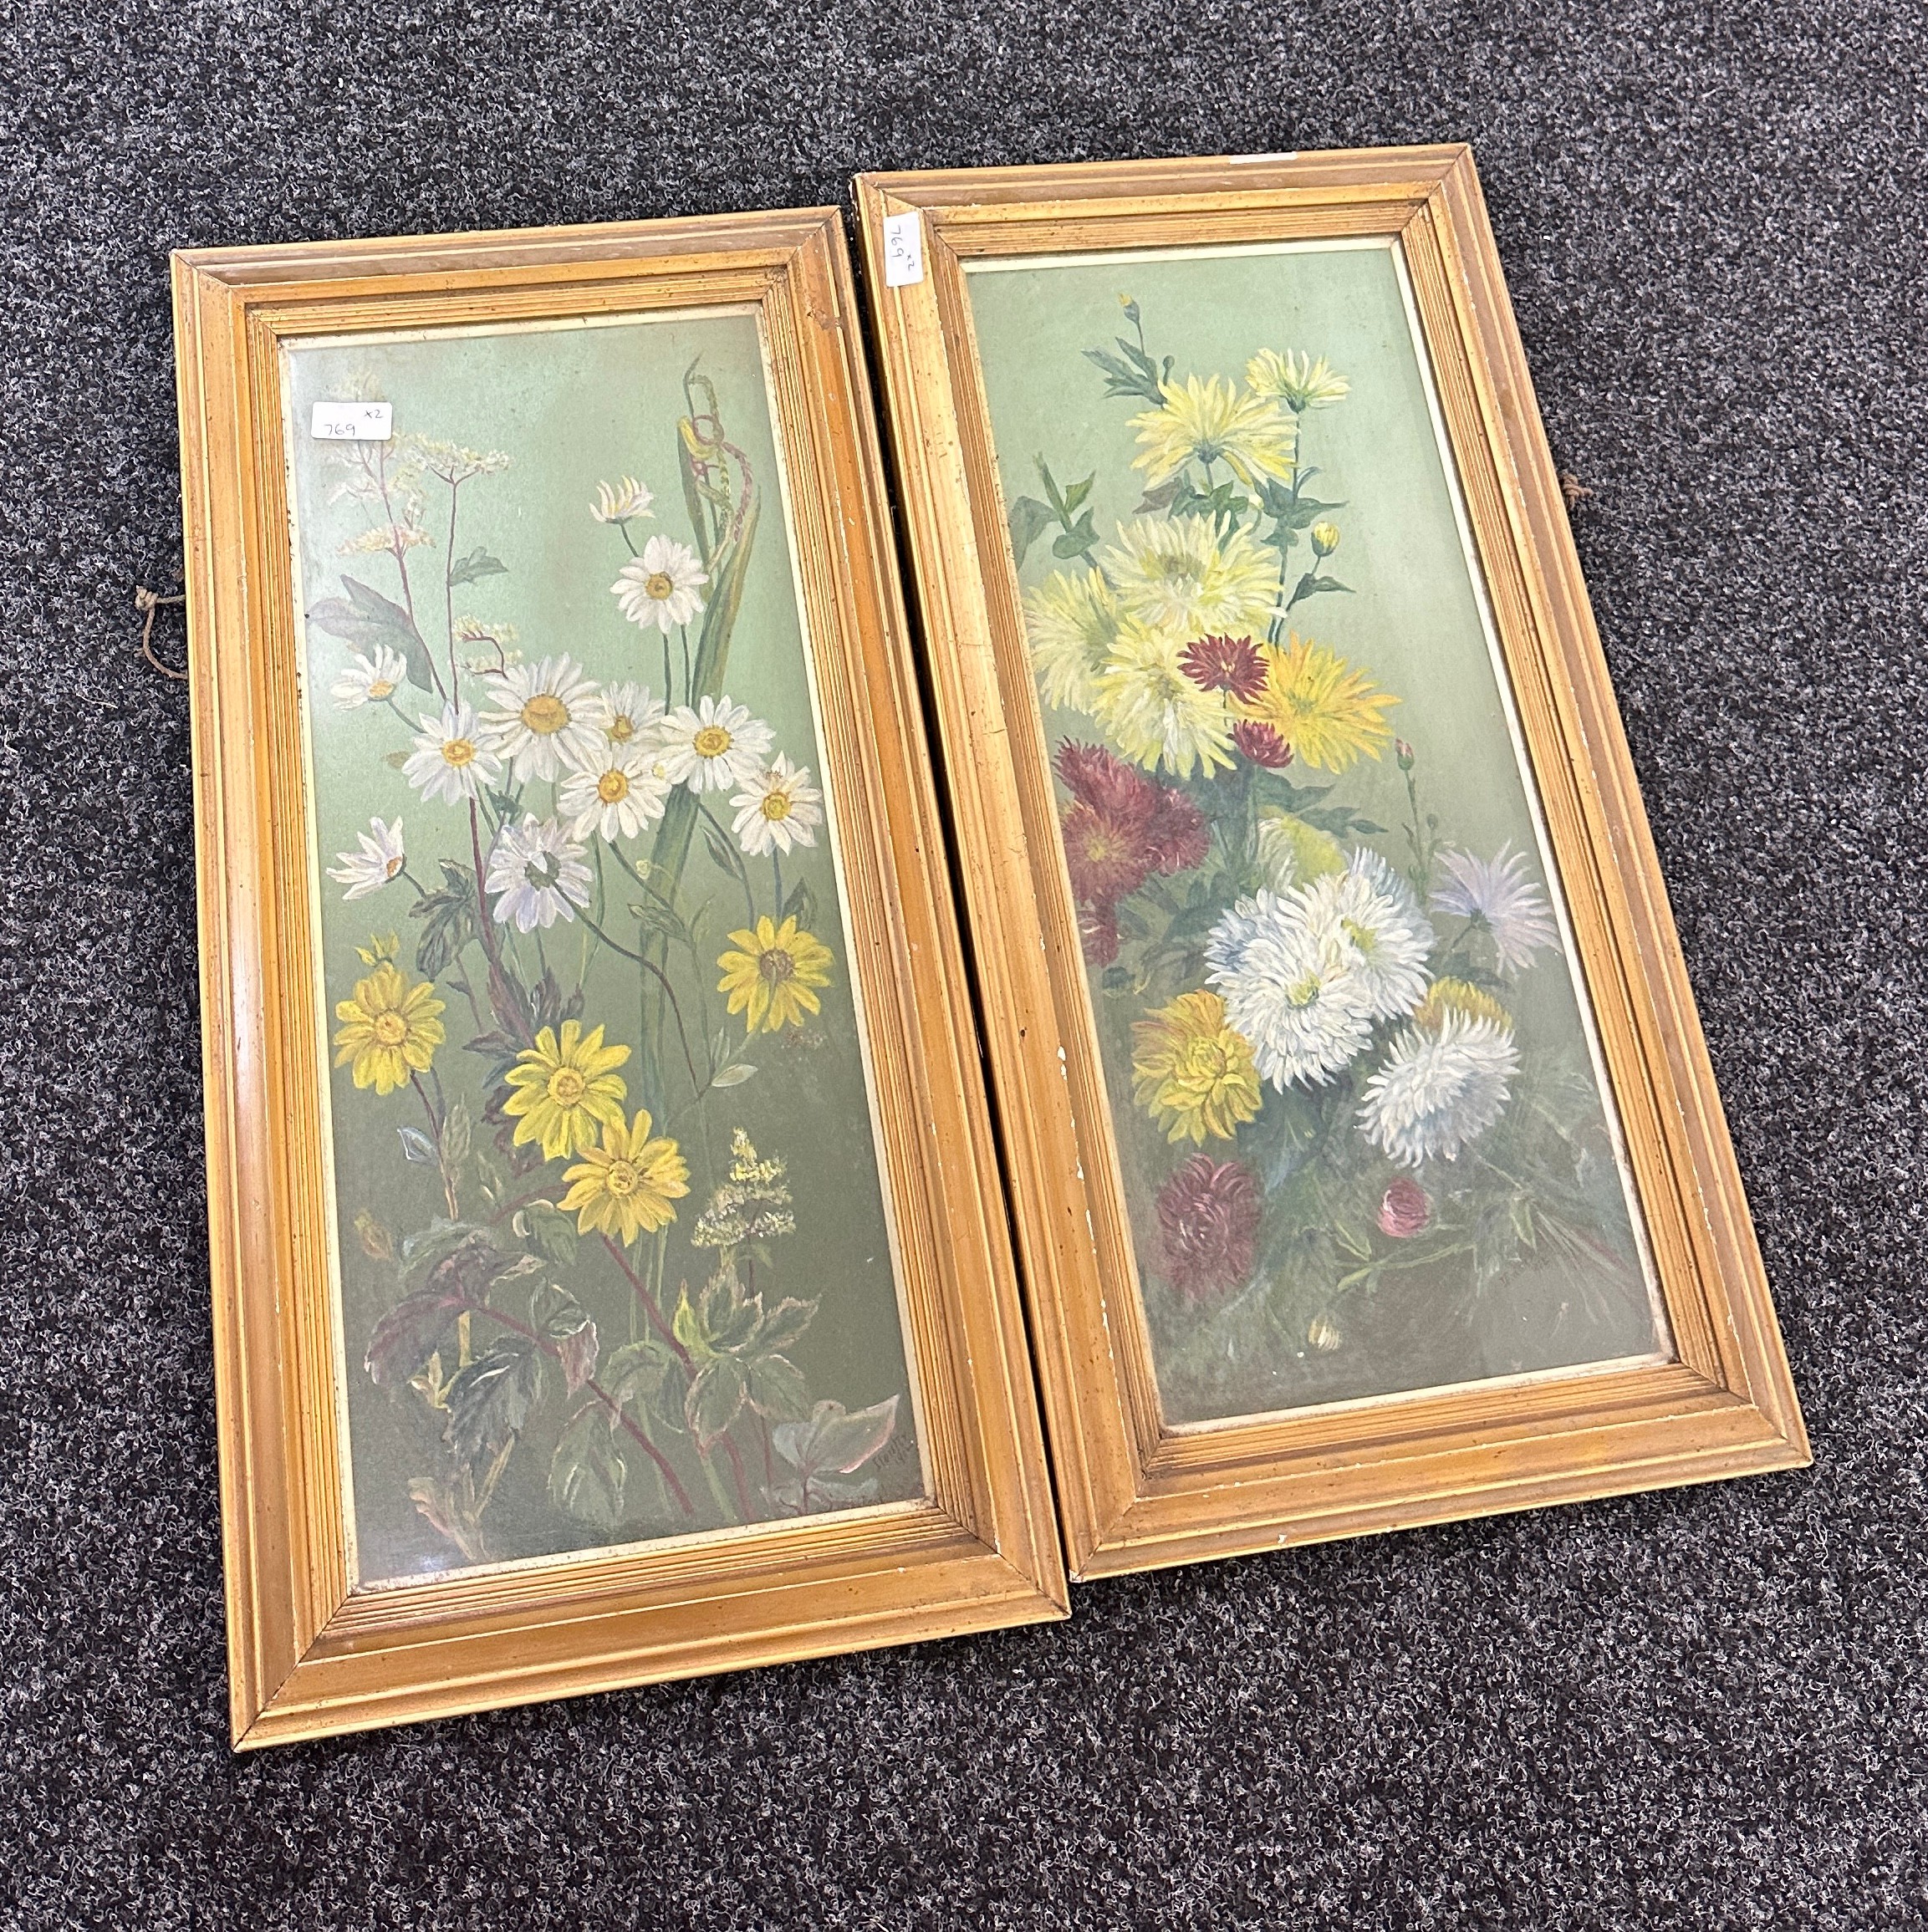 2 Signed framed paintings measures approximately 27 inches tall 13.5 inches wide - Bild 3 aus 3